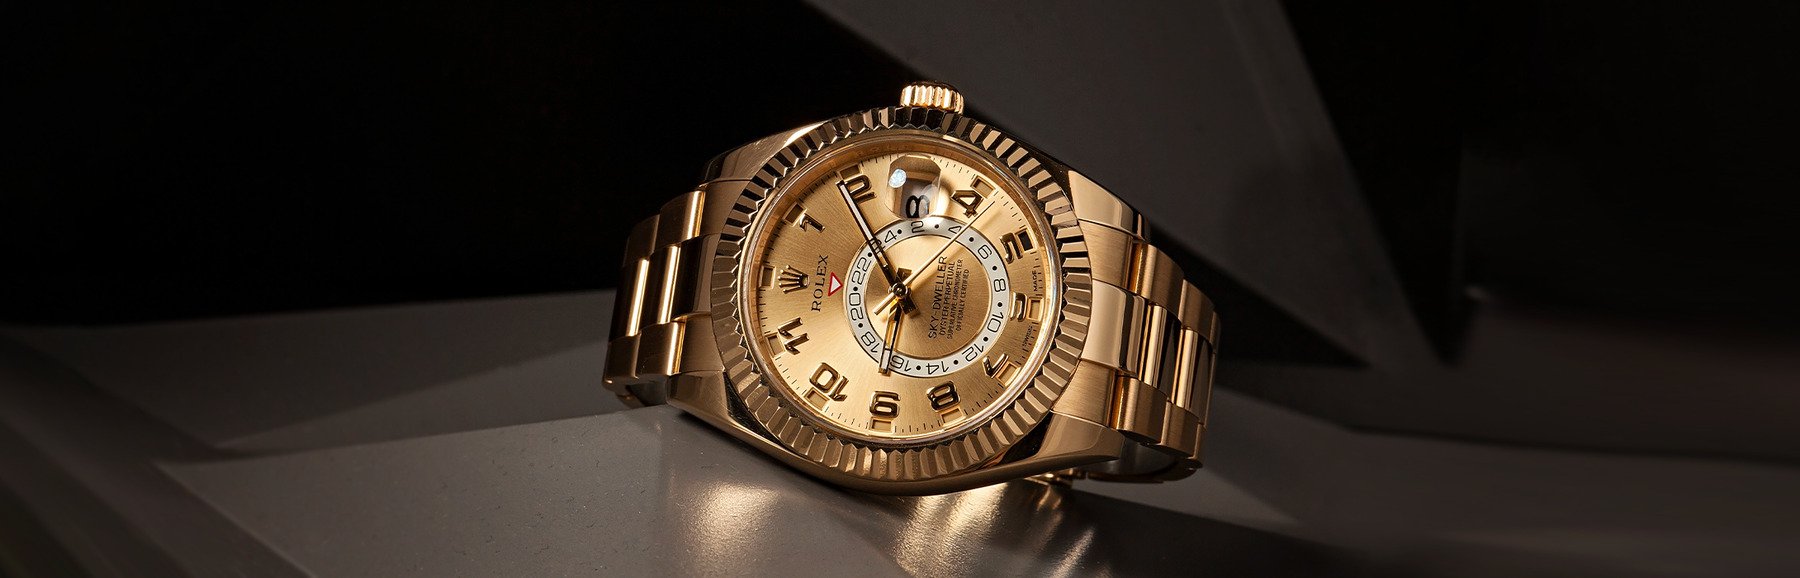 How to Adjust the Time on a Rolex Replica: 8 Steps (with Pictures)